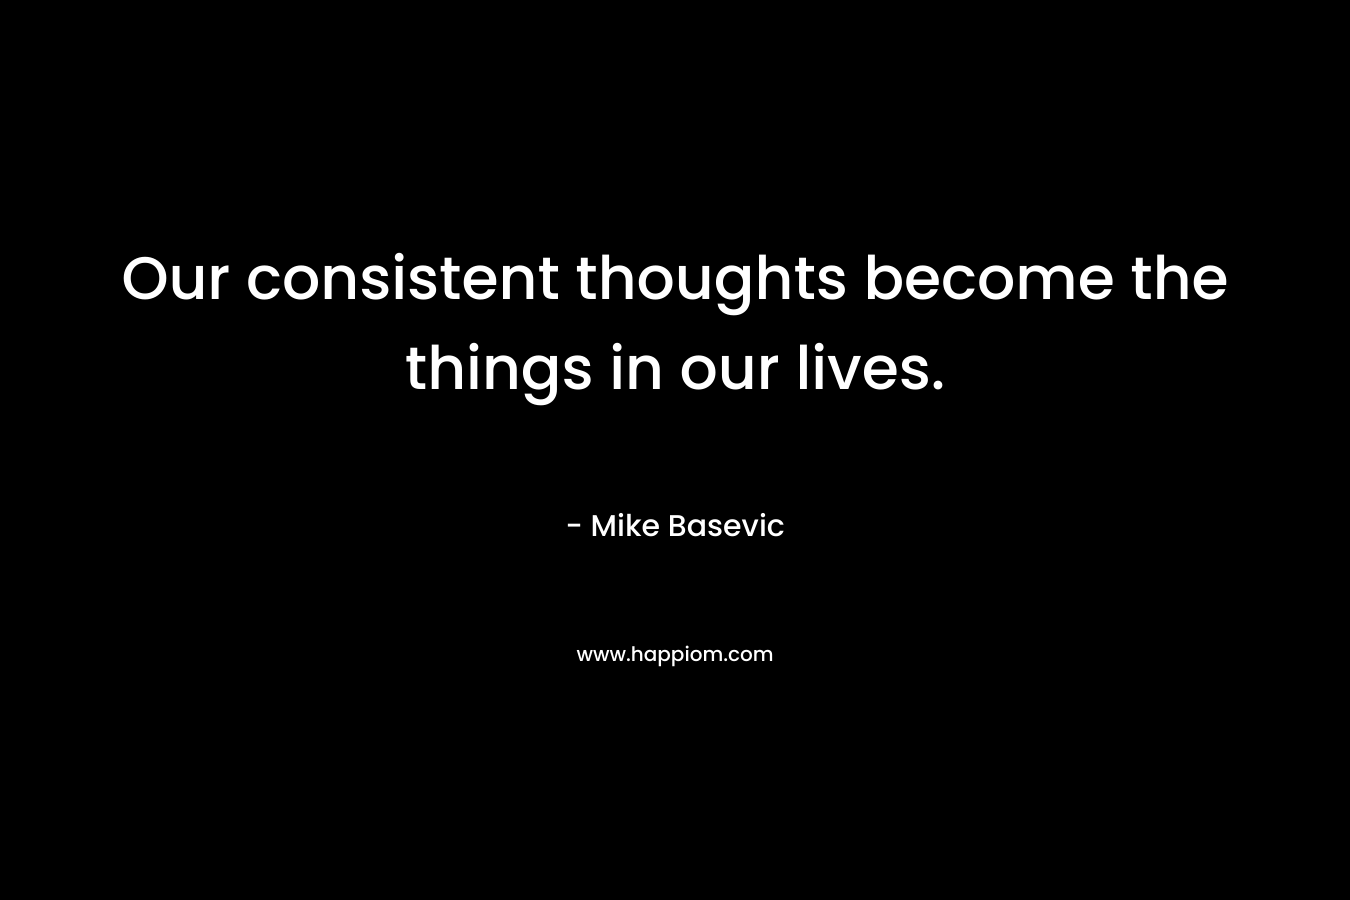 Our consistent thoughts become the things in our lives.